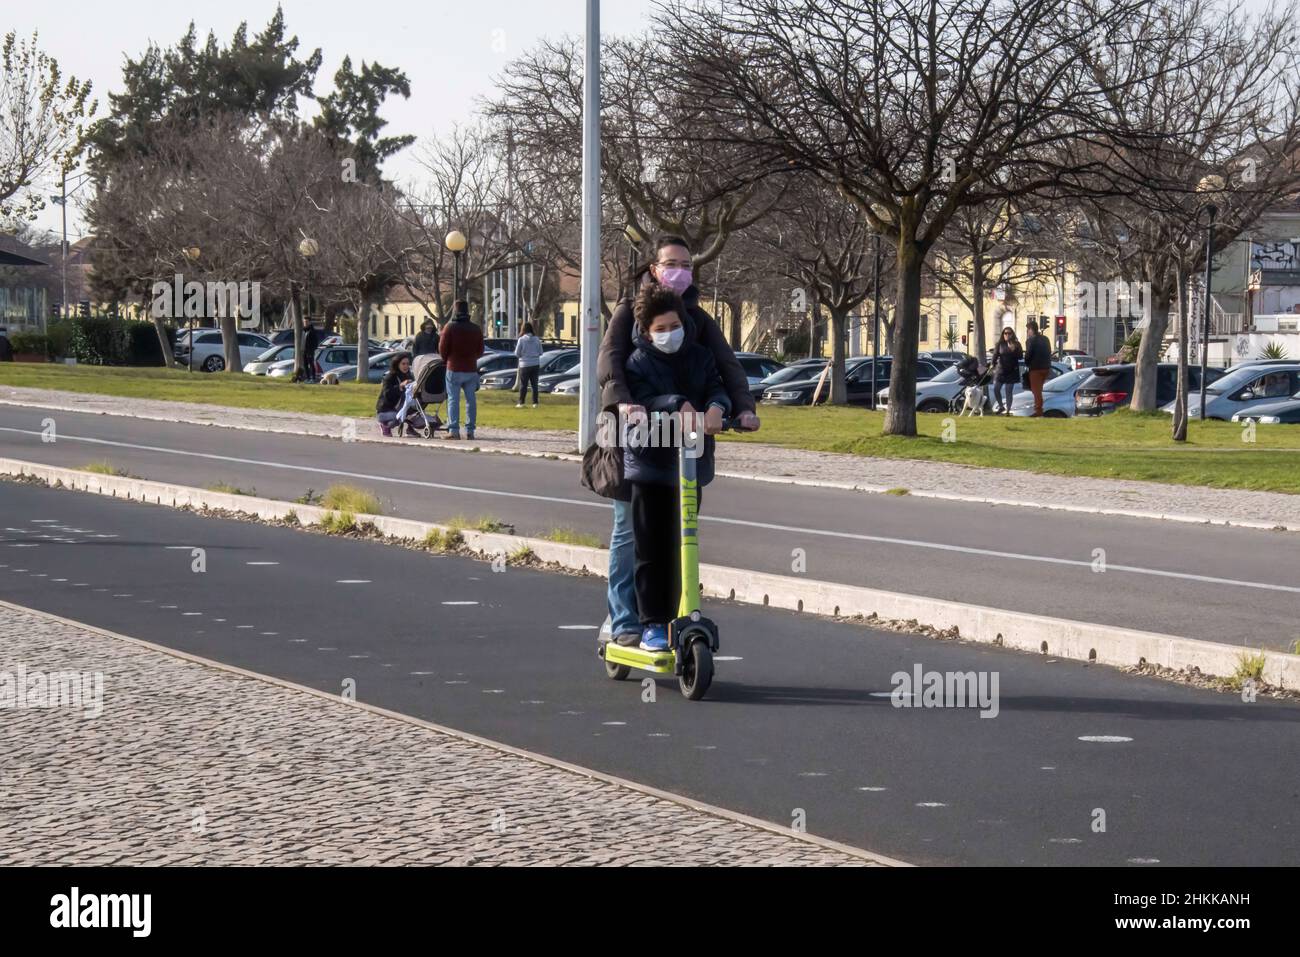 People wearing protective masks ride a scooter on the boulevard near the 25 de Abril Bridge. The Portuguese Council of Ministers has approved a Law Decree that puts an end to the requirement, for those entering Portugal, 'to present a test with a negative result to those who present the EU covid-19 digital certificate in any of its modalities or another vaccination test that has been recognized'. Stock Photo